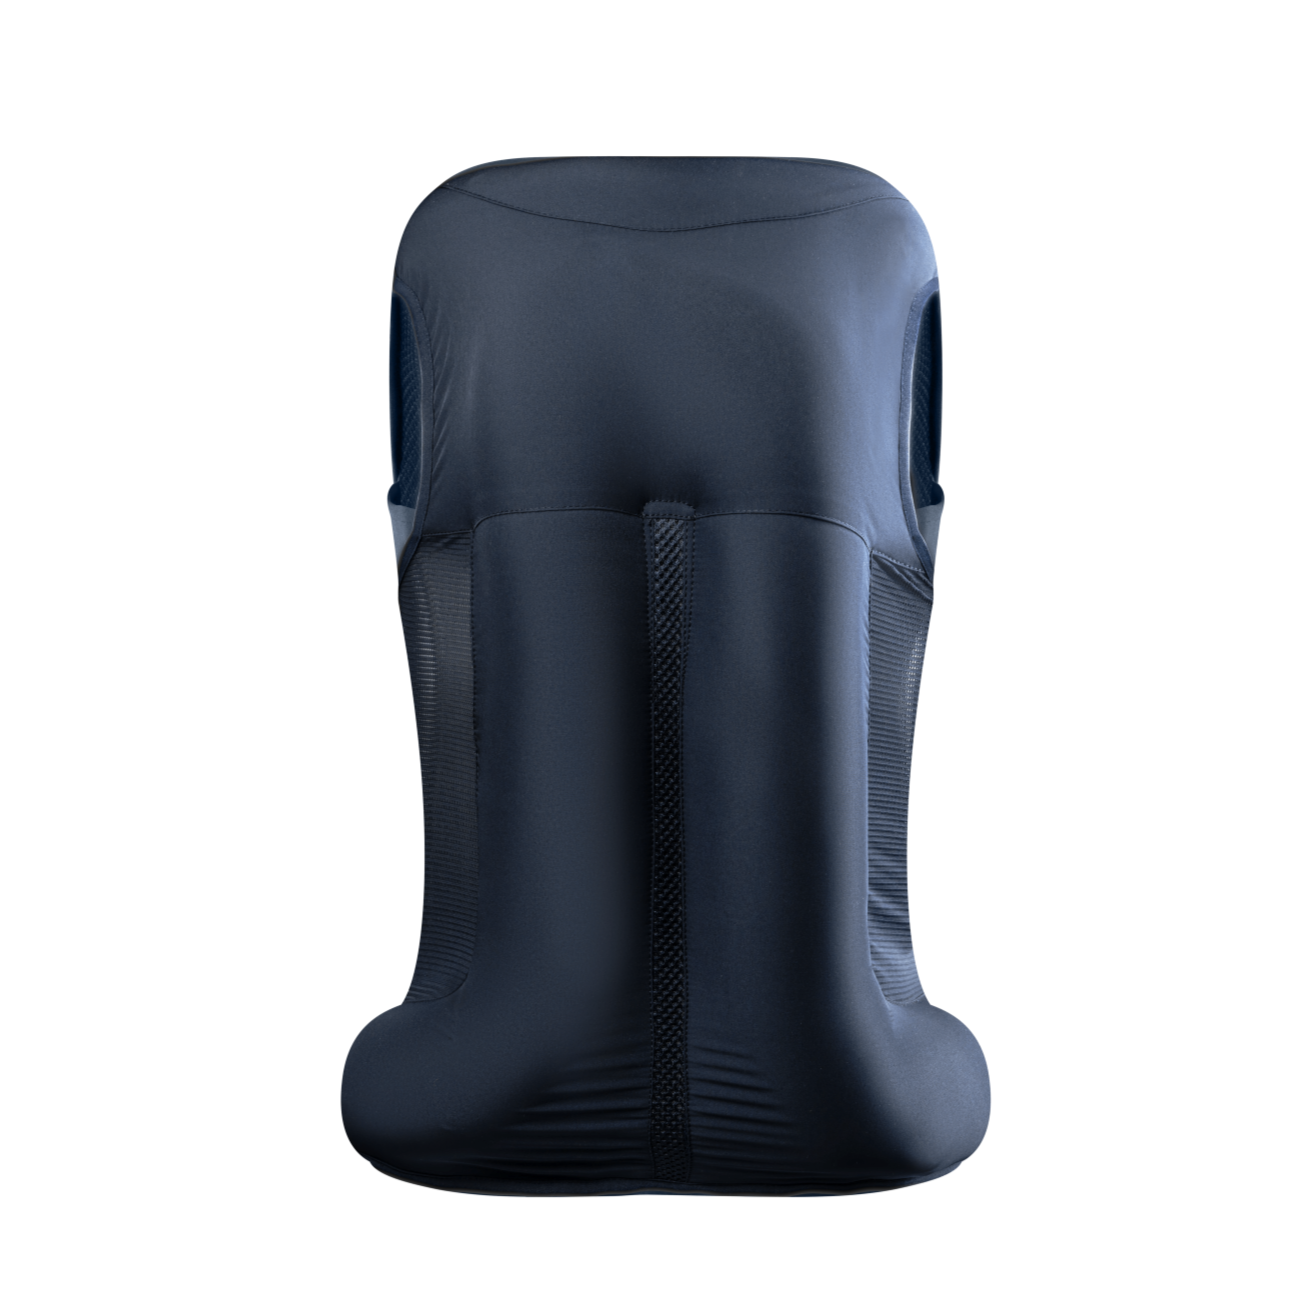 Air vest for show jumping